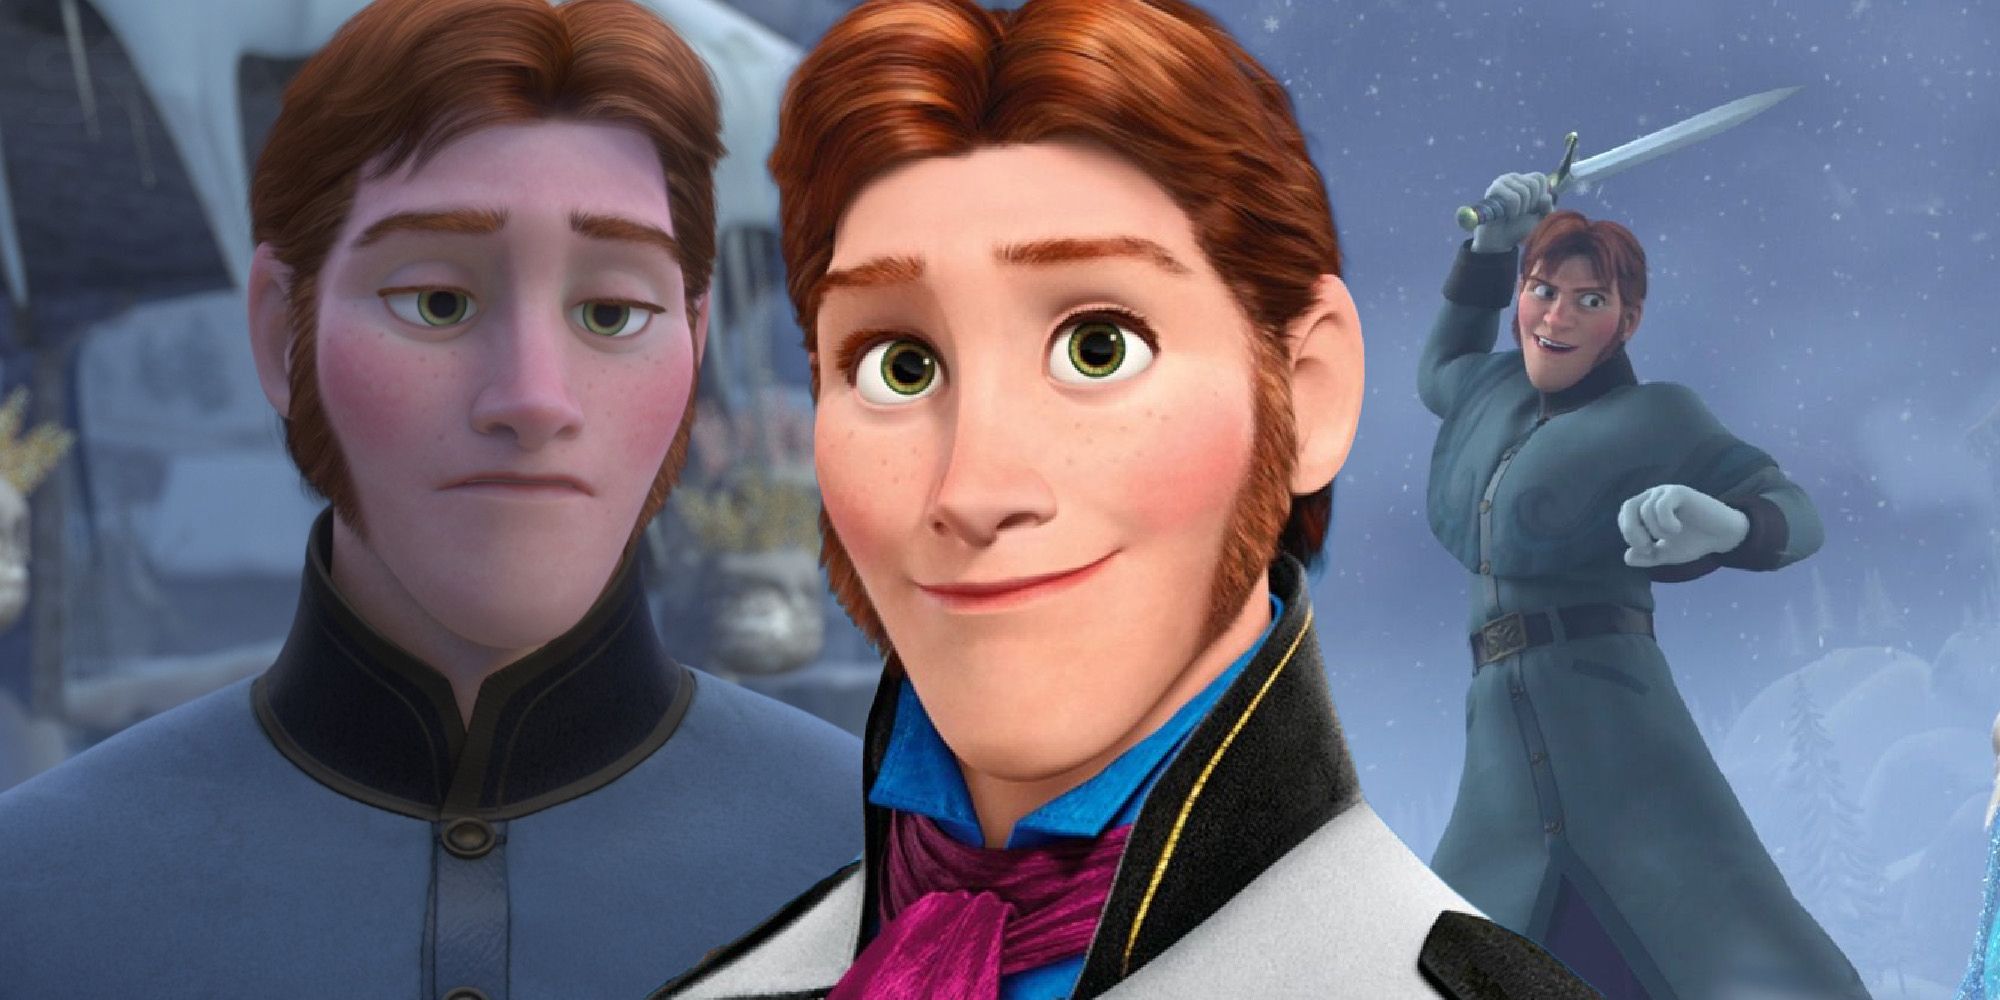 Frozen 3 Theory: Prince Hans Will Return As The Villain. - S